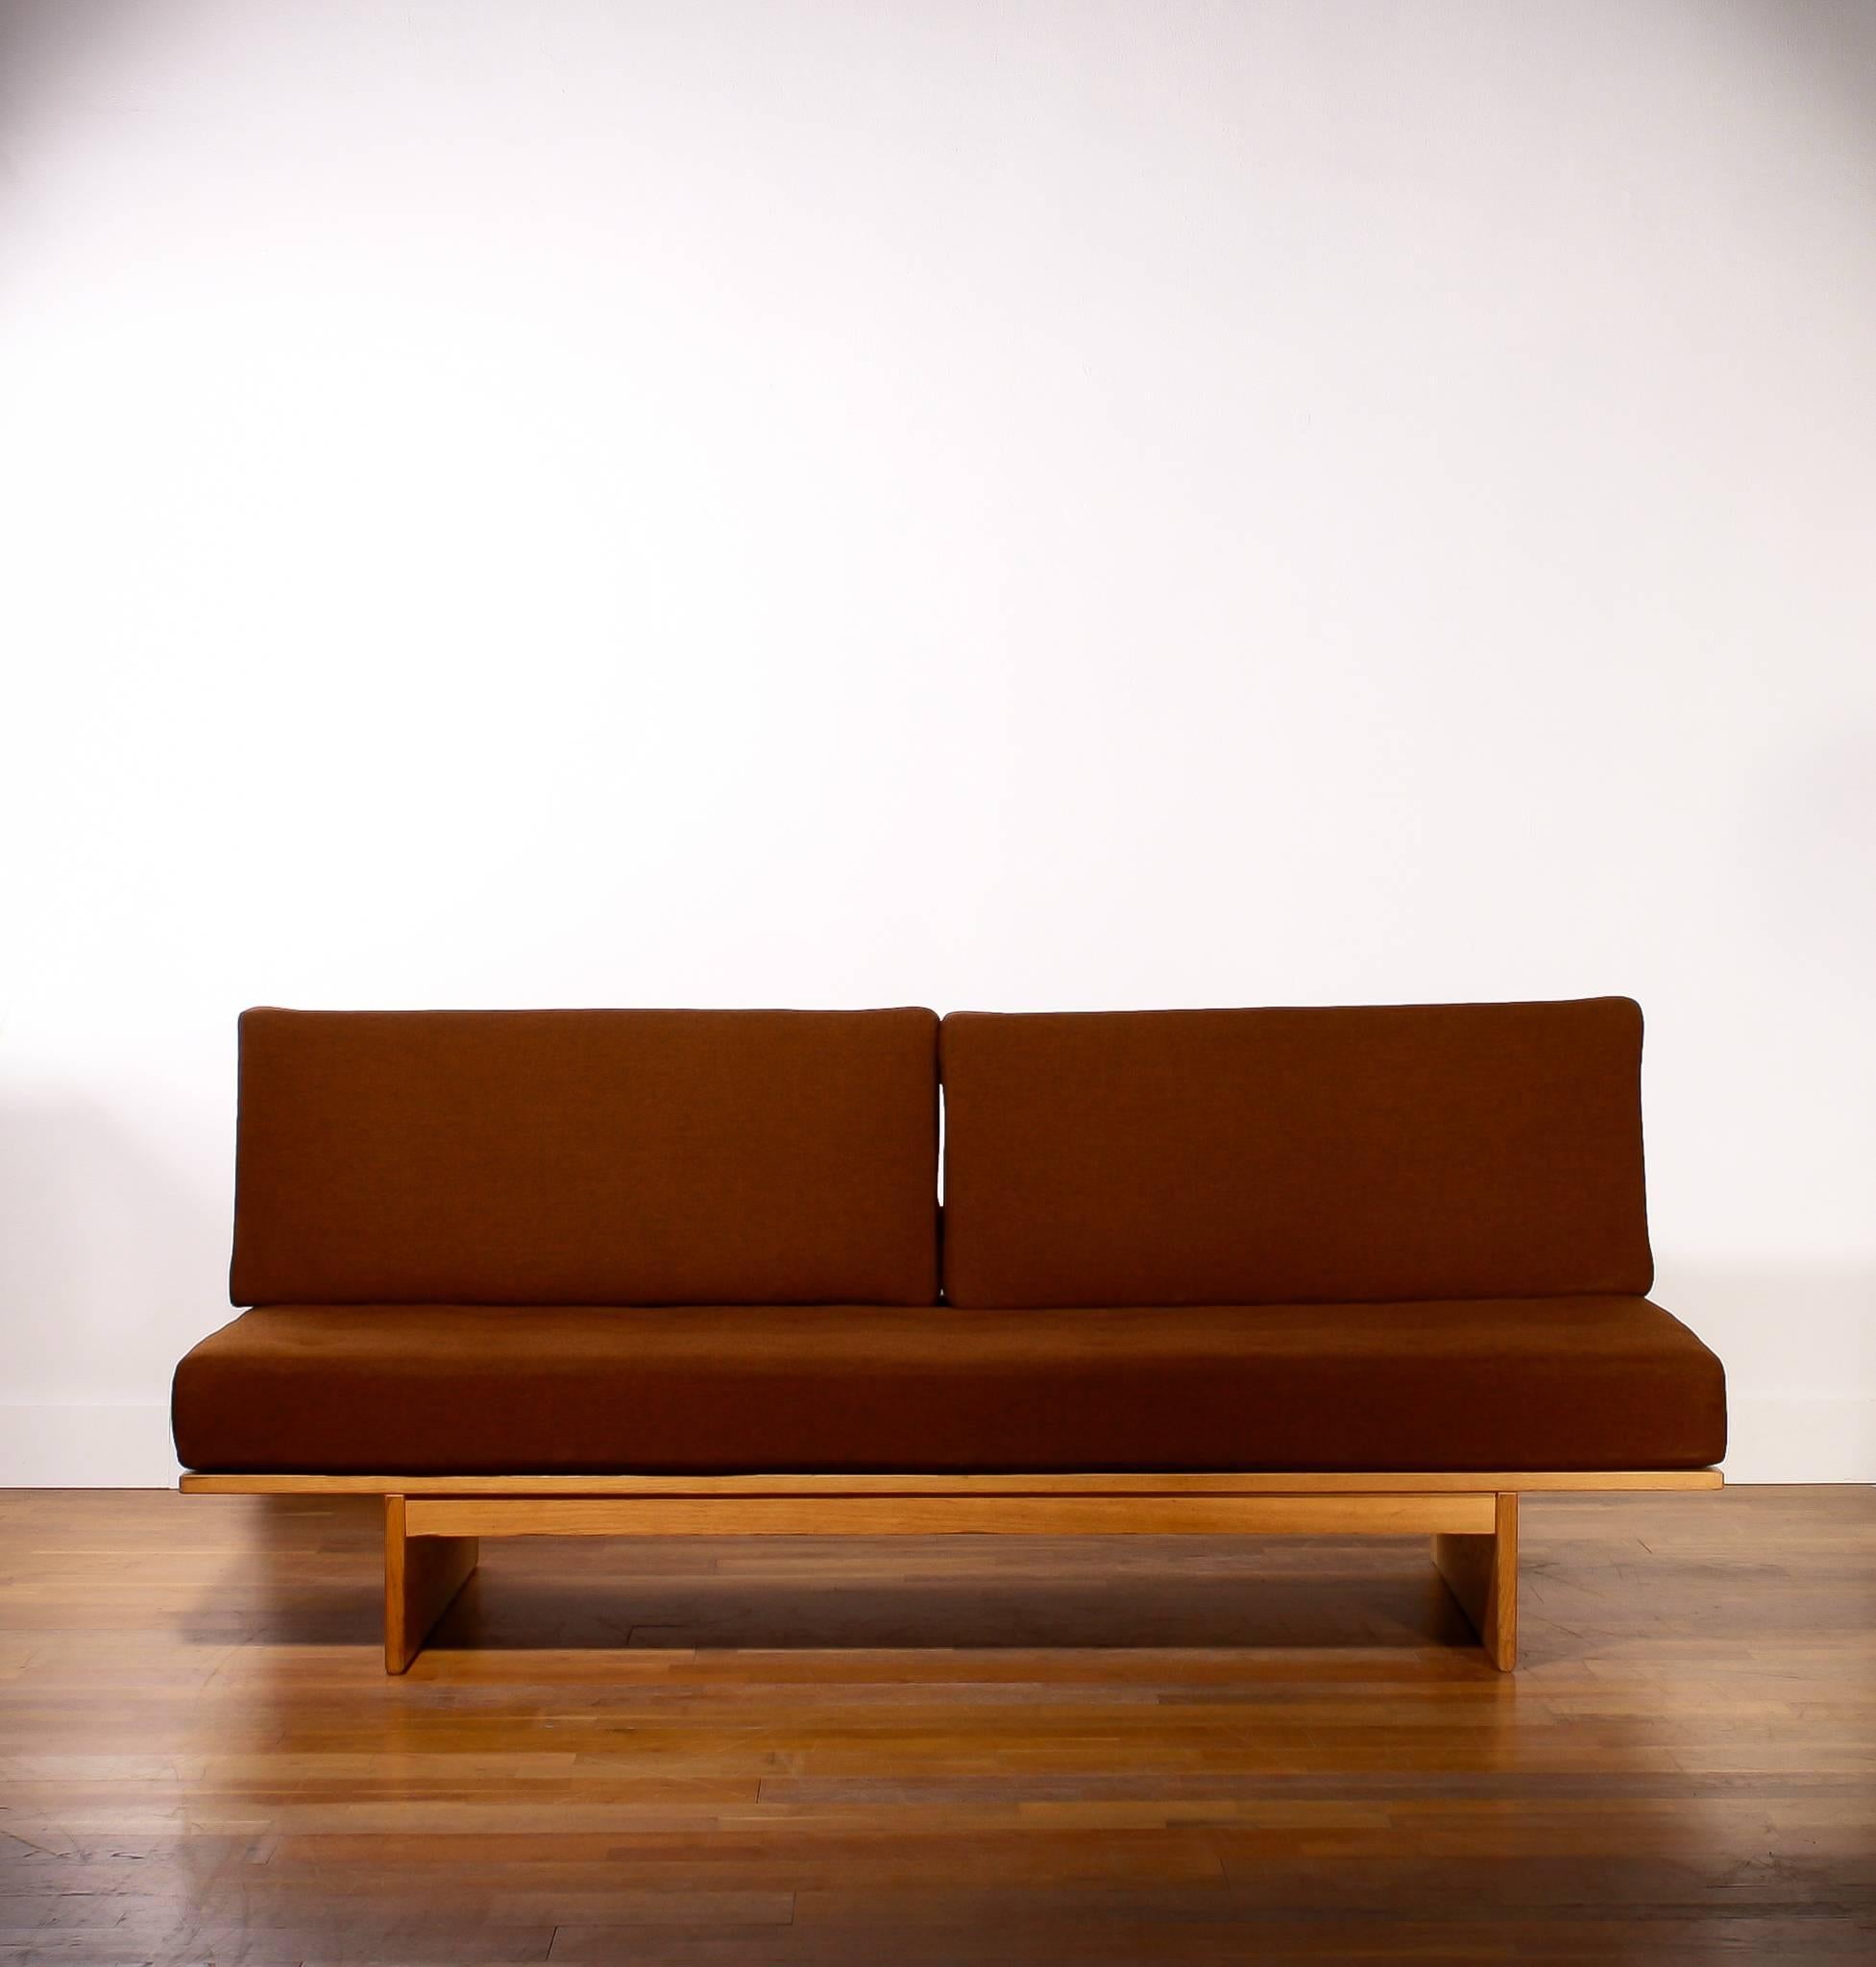 In absolute top condition sleeper or daybed in oak and dark brown wool.

The oak wooden frame and the dark brown wool upholstery are in excellent condition.

Designed by Bra Bohag.

Manufactured by DUX.

Design period 1960-1969.

The